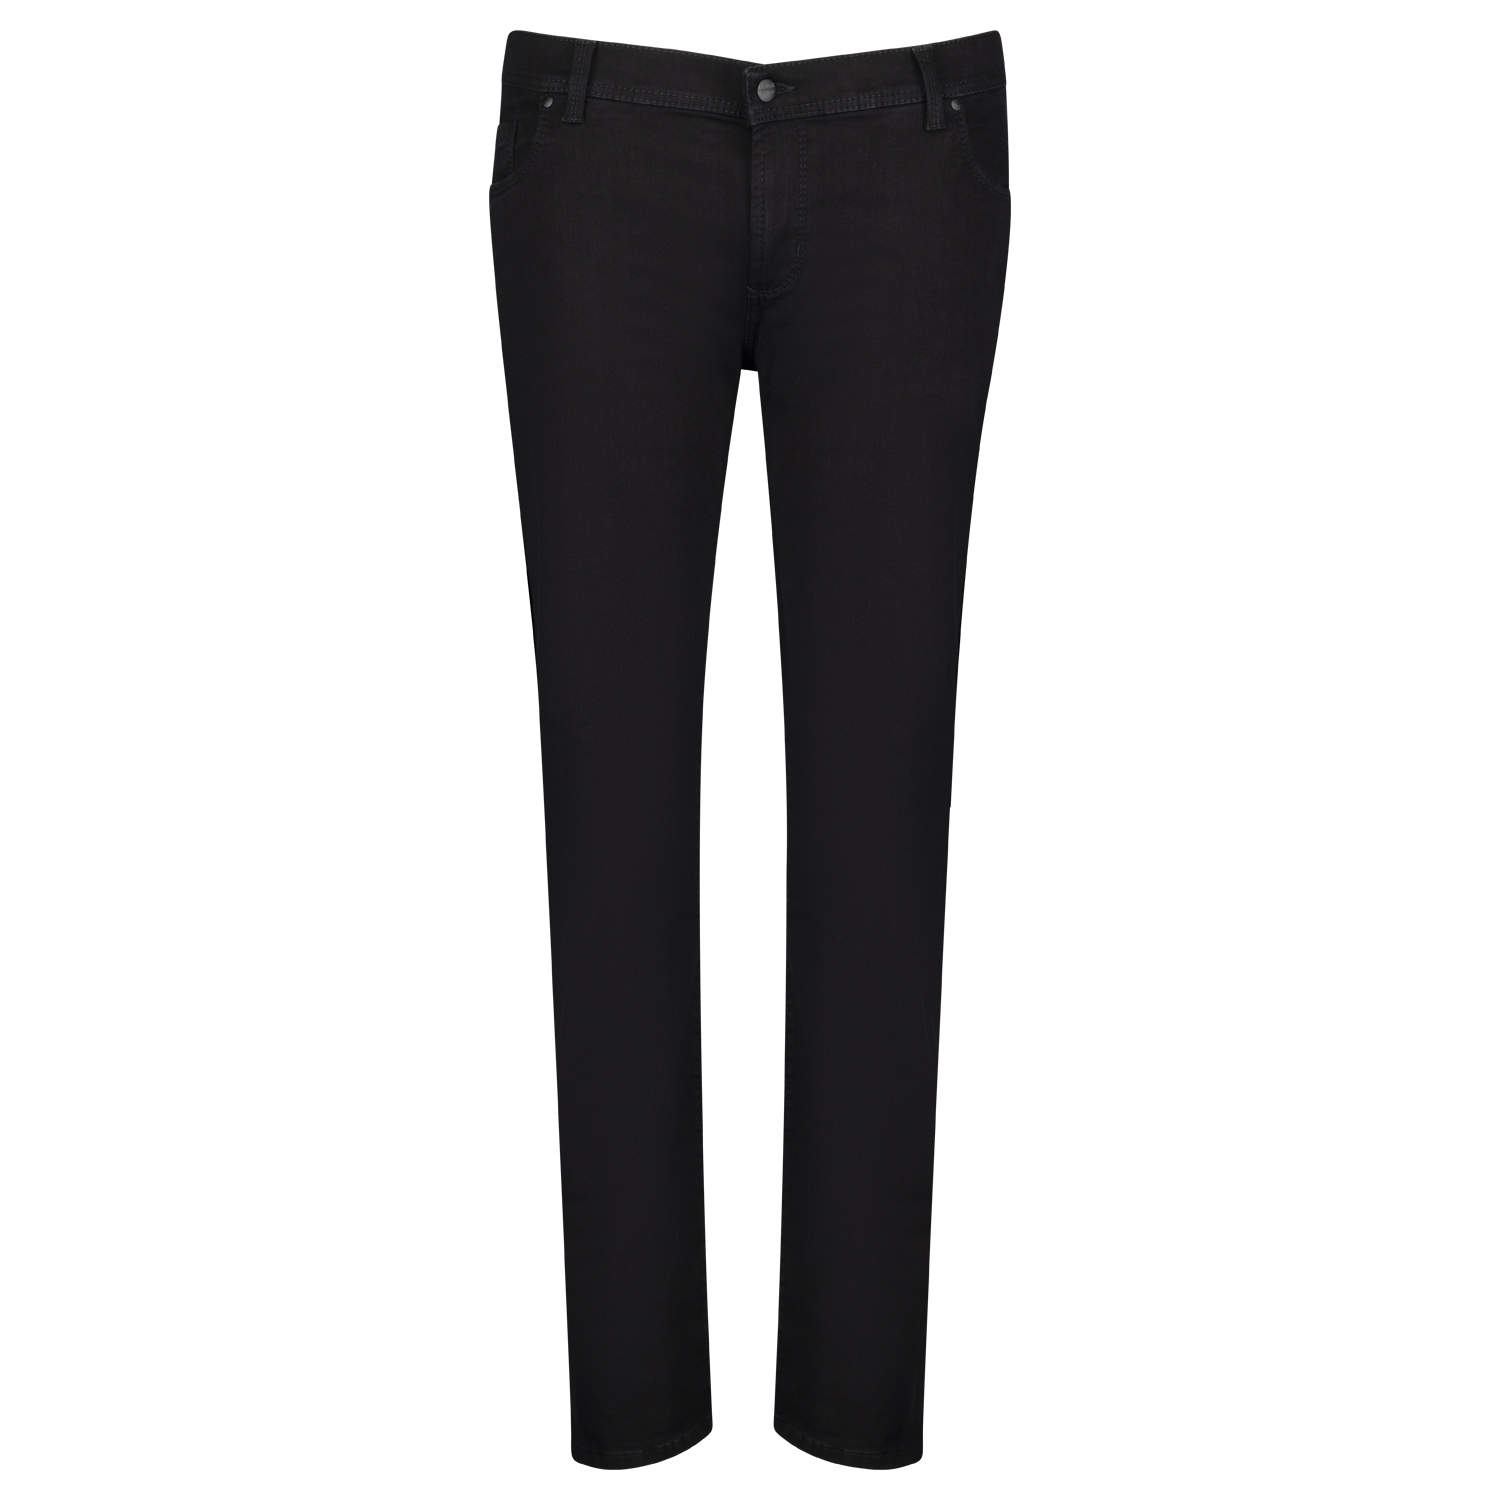 5-Pocket Jeans homme avec stretch "Thomas" noir by Pioneer grandes tailles (Taille basse): 28 - 40